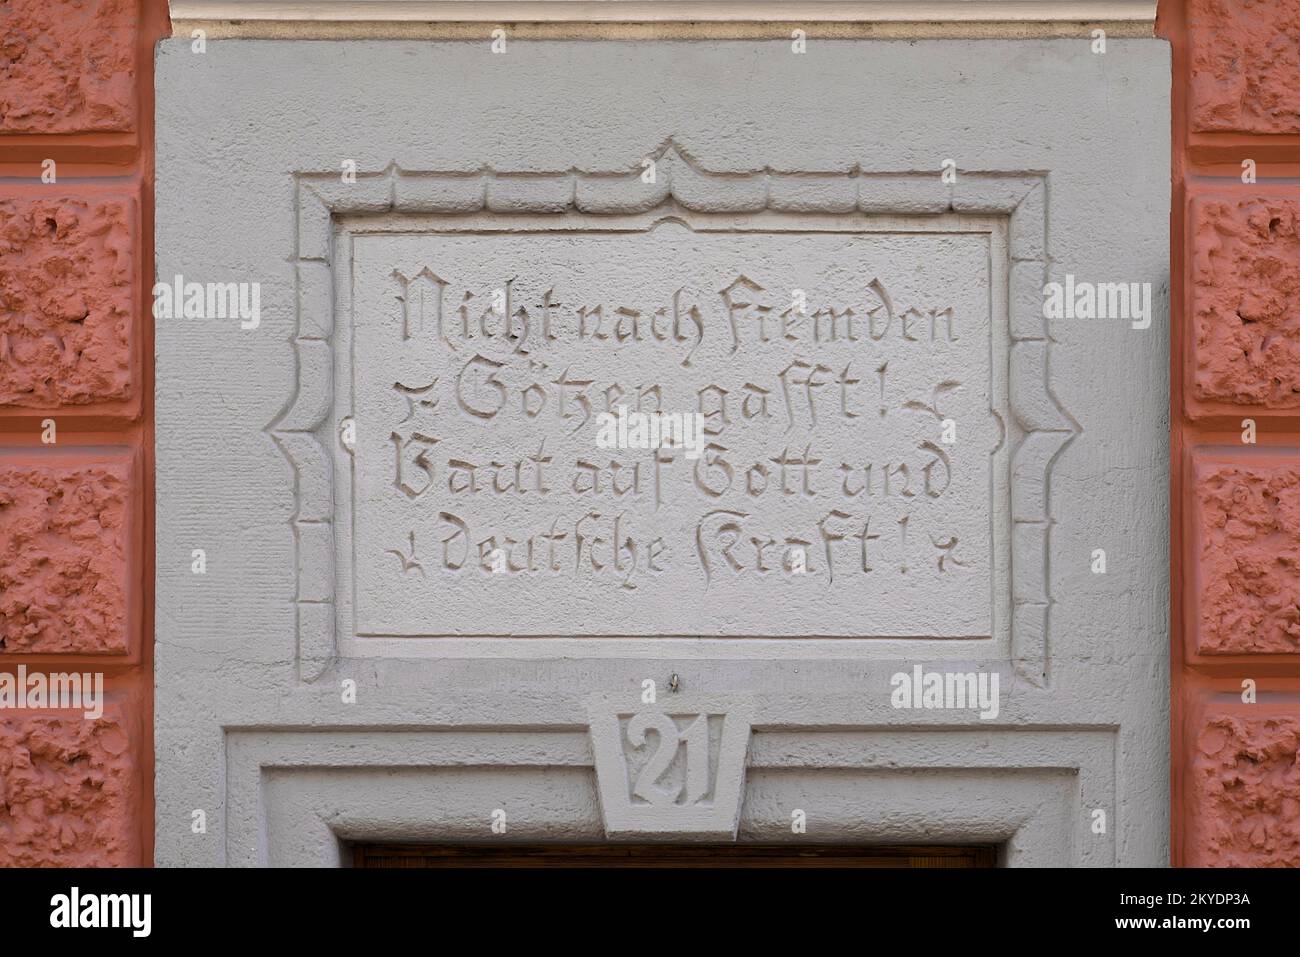 Saying on a house from 1924, Erlangen, Middle Franconia, Bavaria, Germany Stock Photo